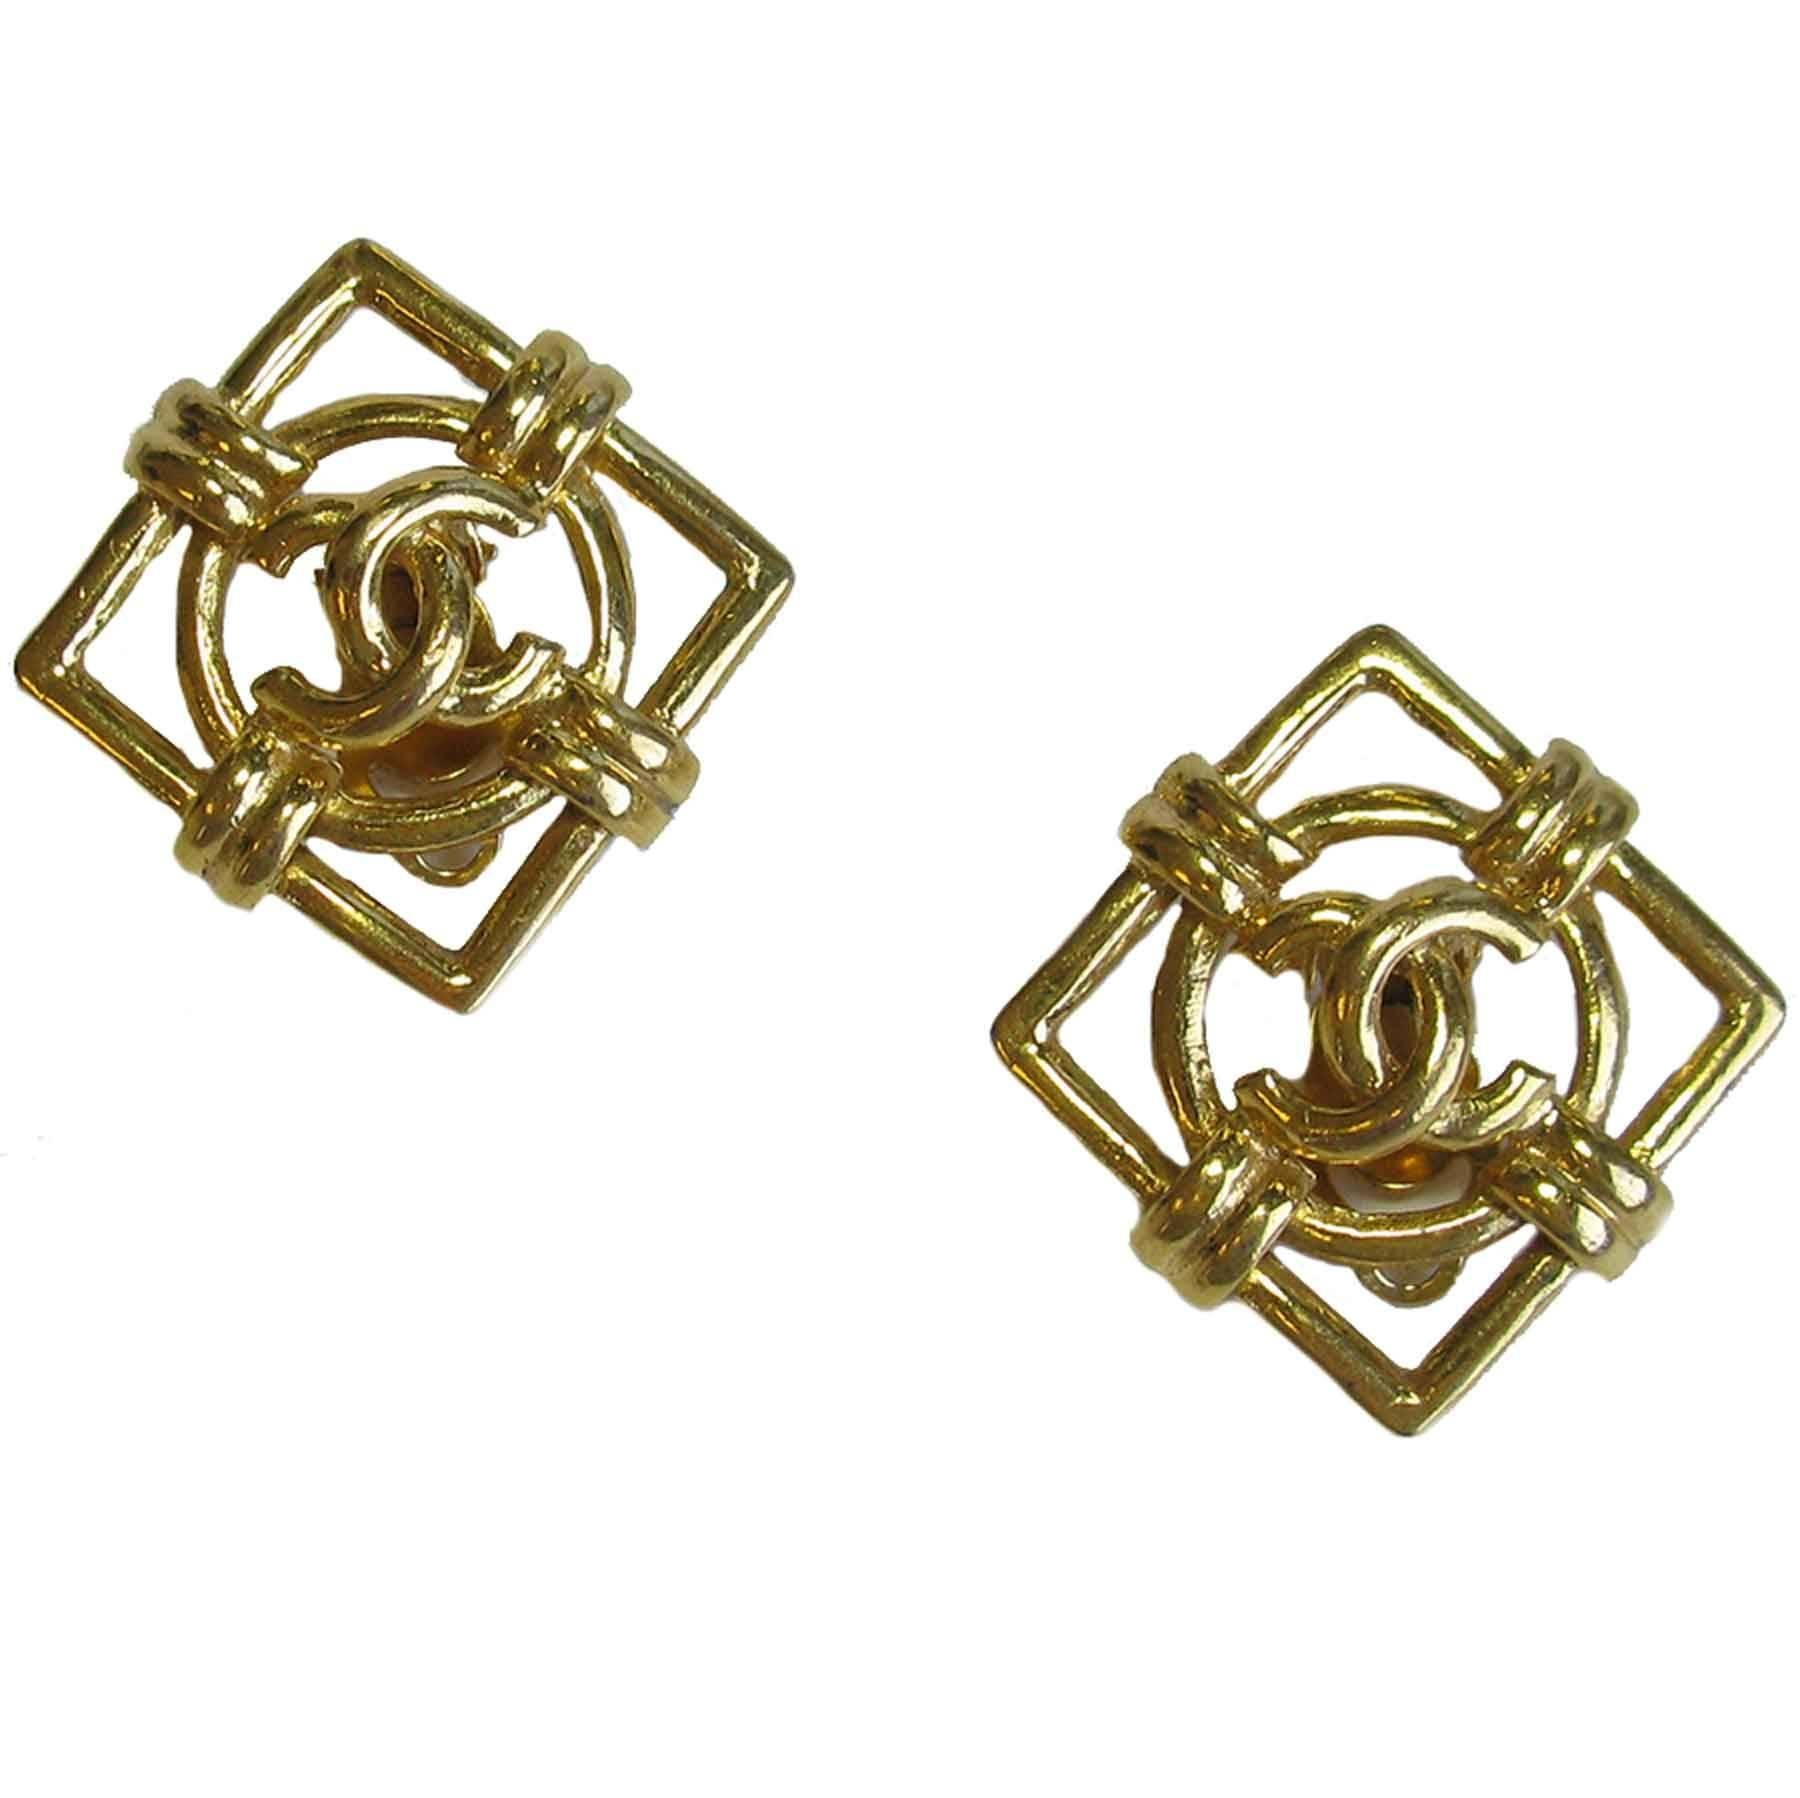 Vintage CHANEL Square Clip-on Earrings in Gilt metal